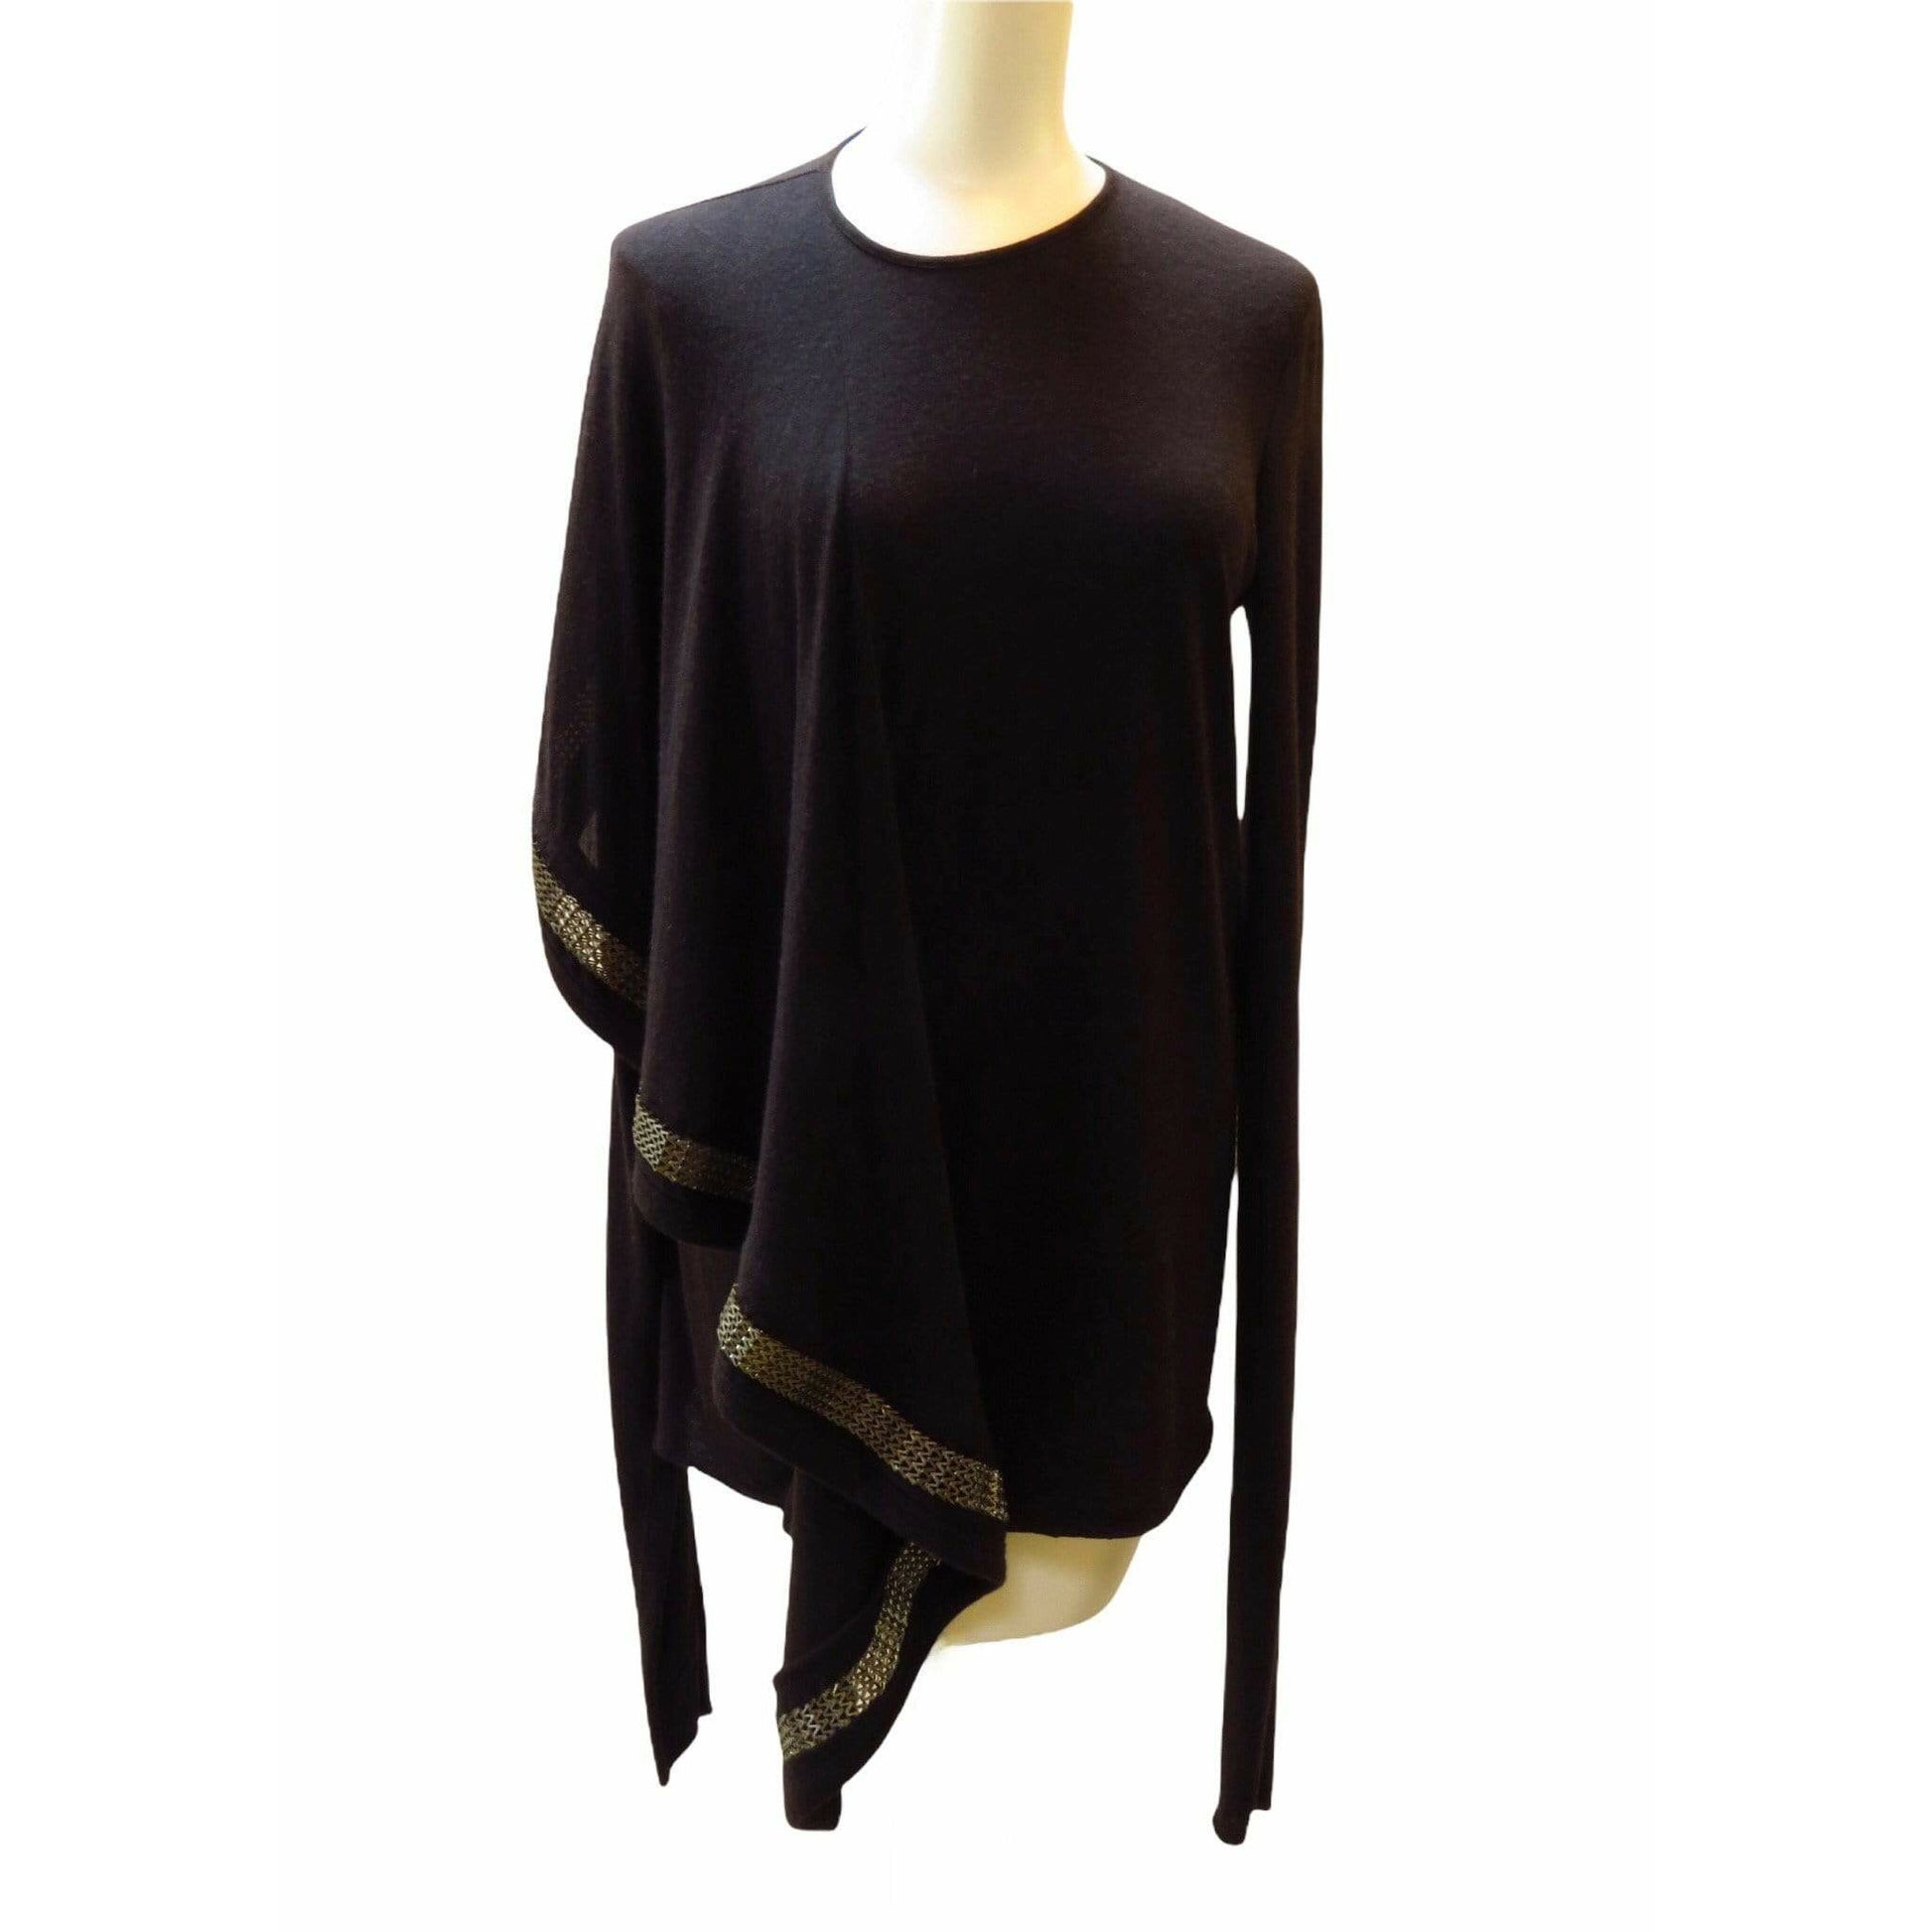 rick-owens-knit-top-with-chains Shirts & Tops Black